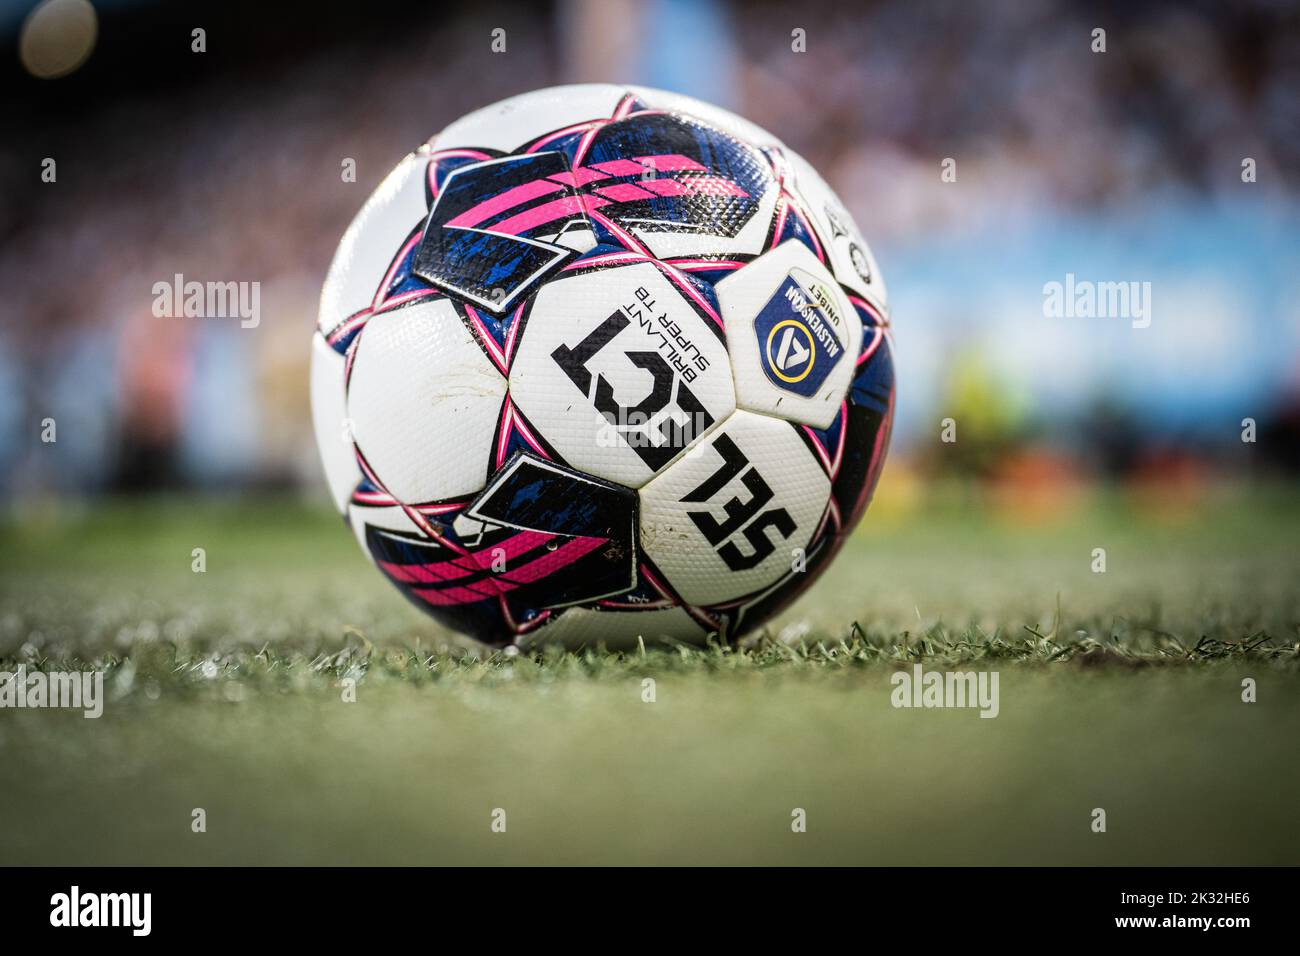 Malmoe, Sweden. 18th, August 2022. The match ball from Select at the UEFA Europa League qualification match between Malmö FF and Sivasspor at Eleda Stadion in Malmö. (Photo credit: Gonzales Photo - Joe Miller). Stock Photo